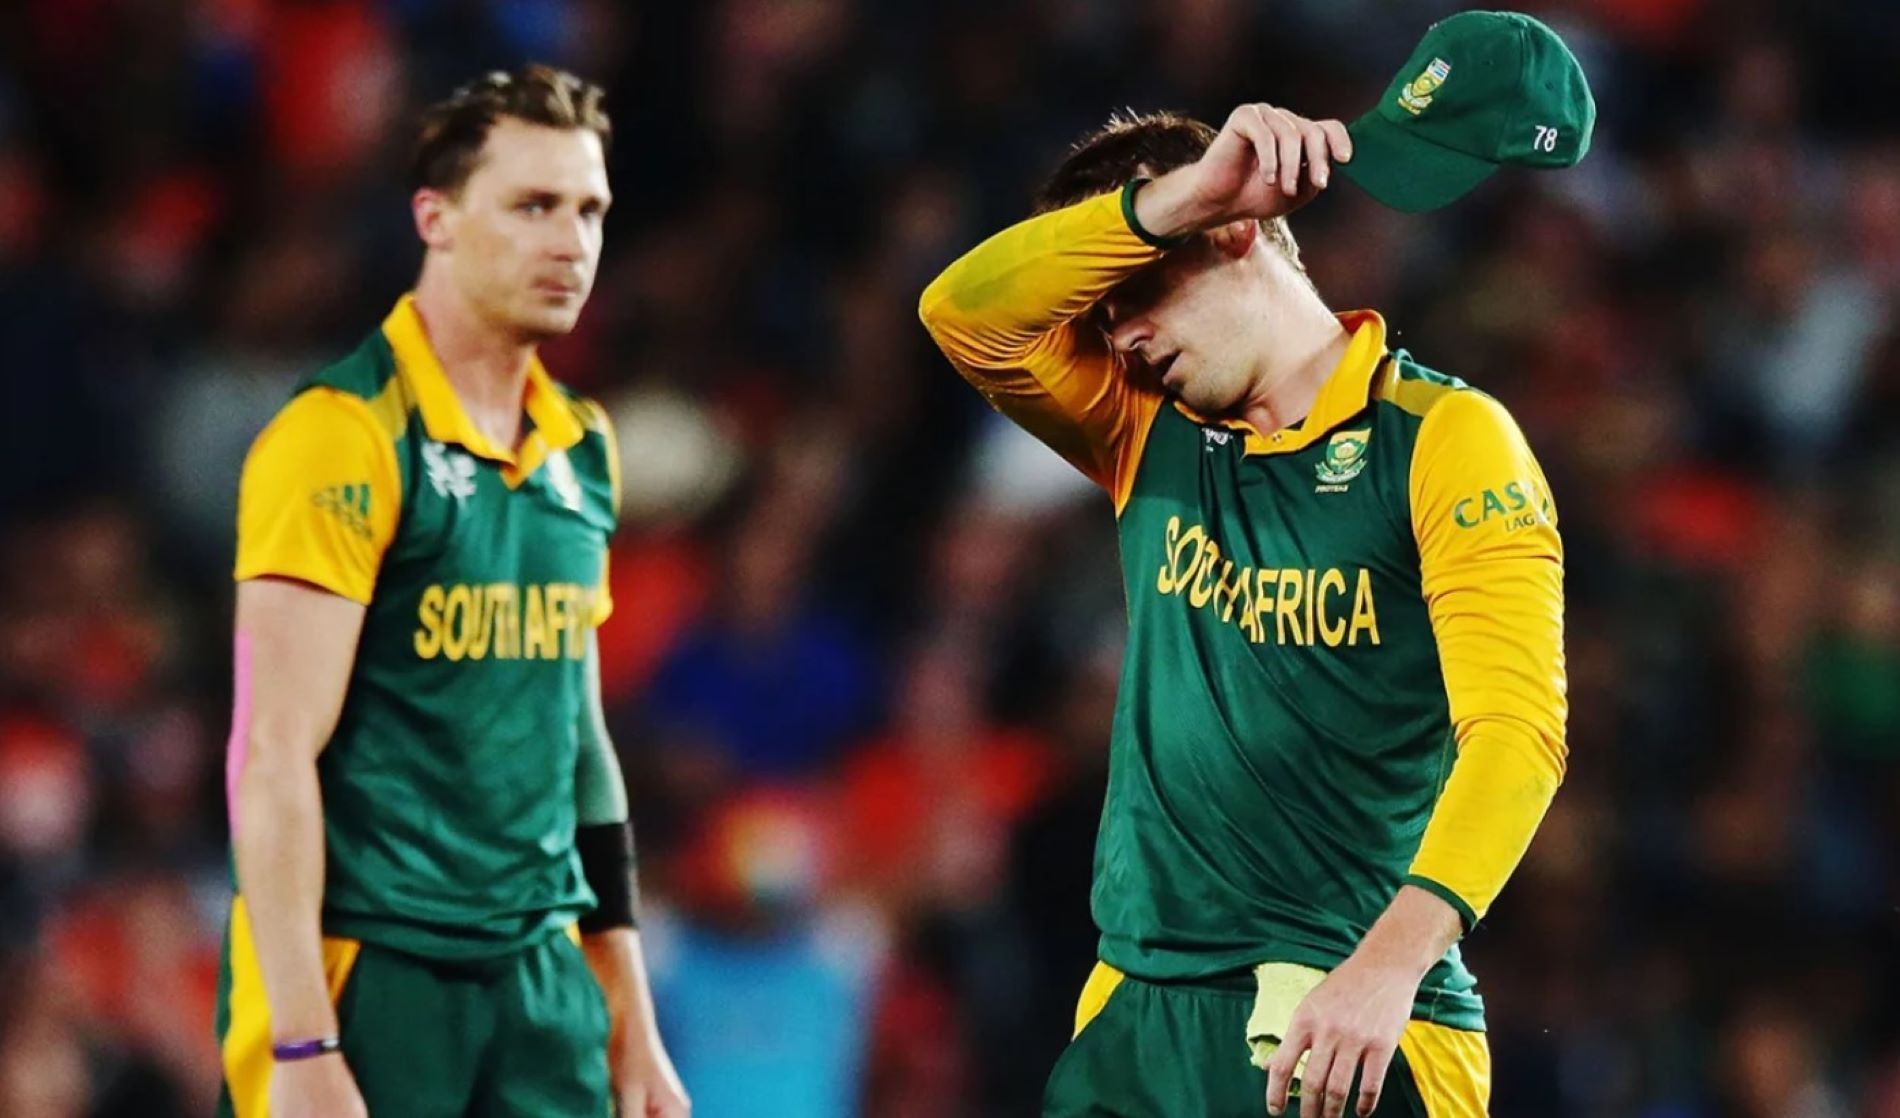 Dale Steyn and Ab de Villiers were at the center of a painful end for South Africa